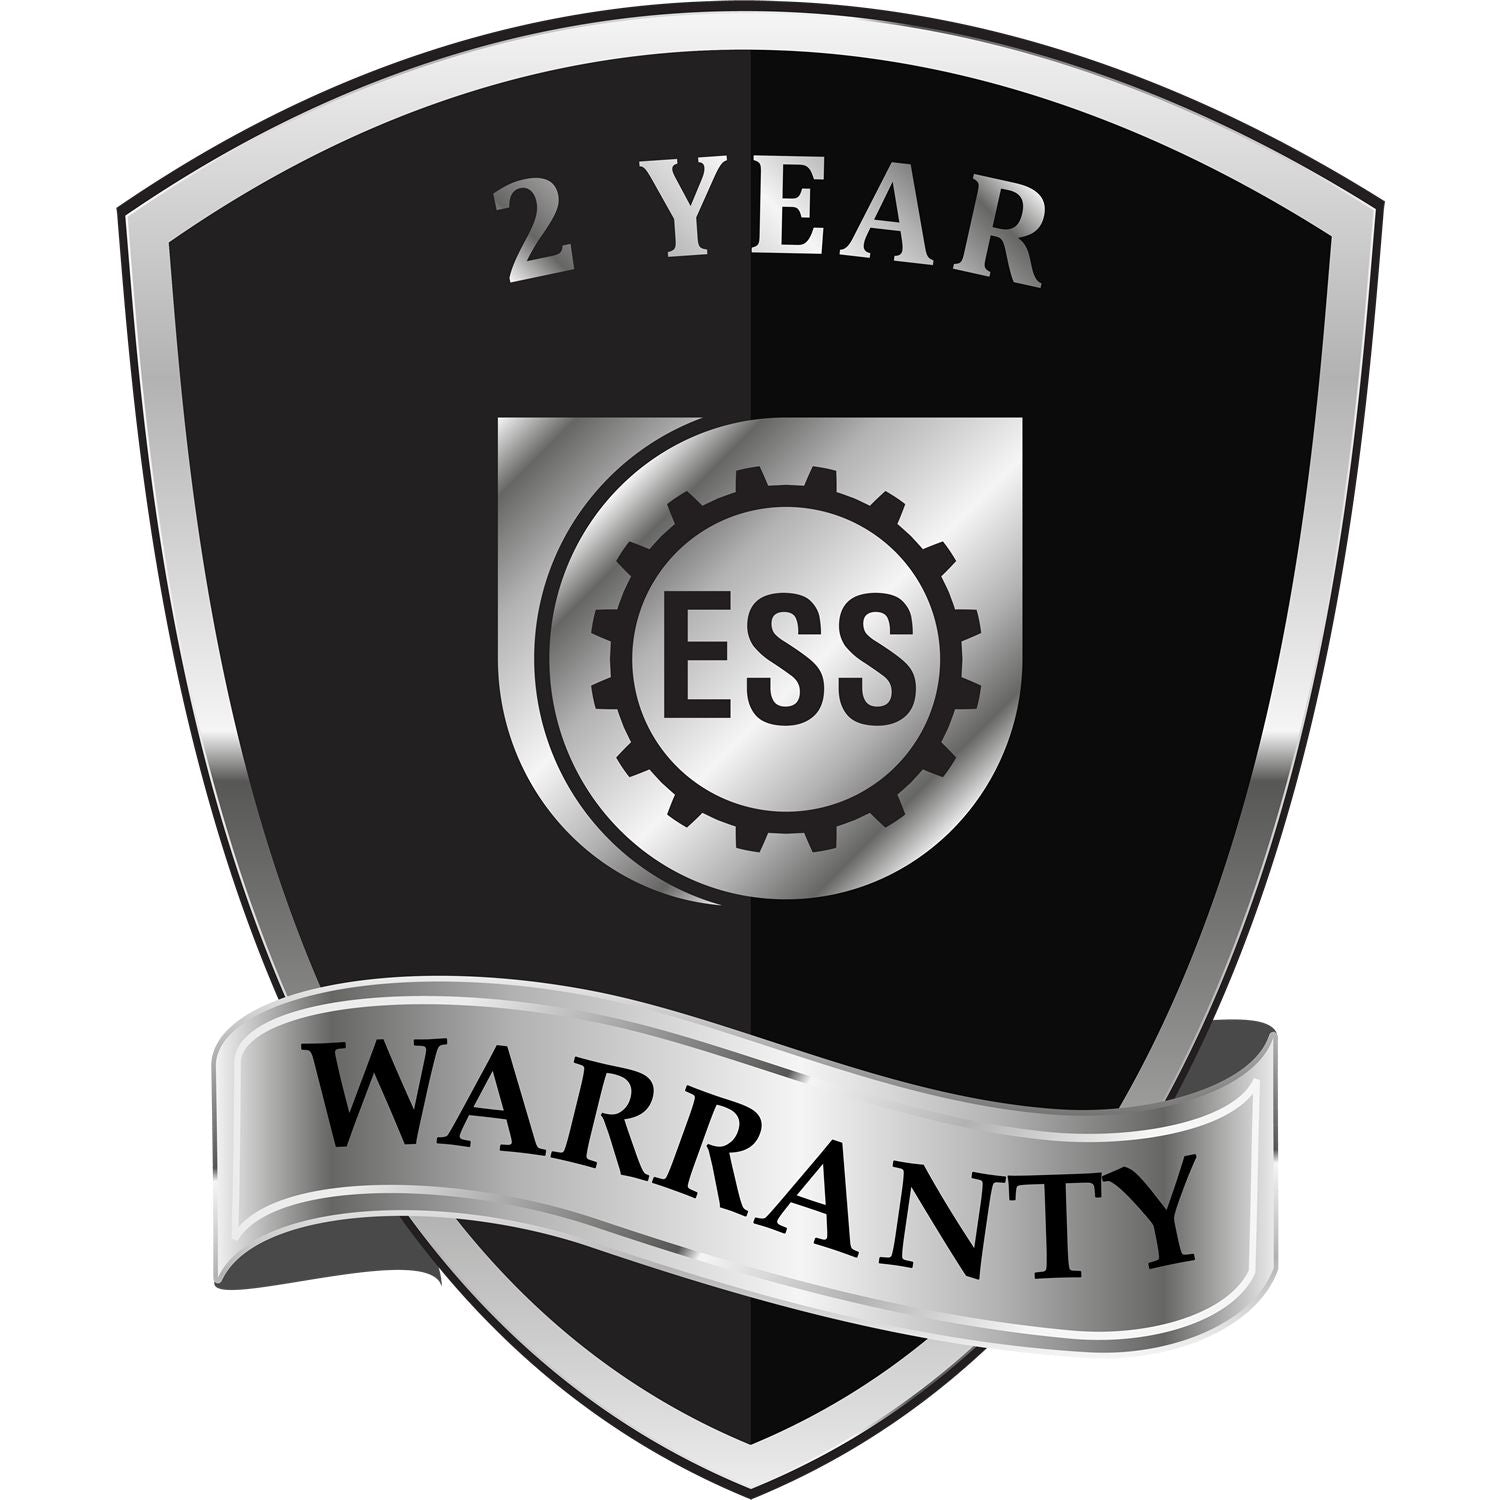 A badge or emblem showing a warranty icon for the State of Wisconsin Extended Long Reach Engineer Seal